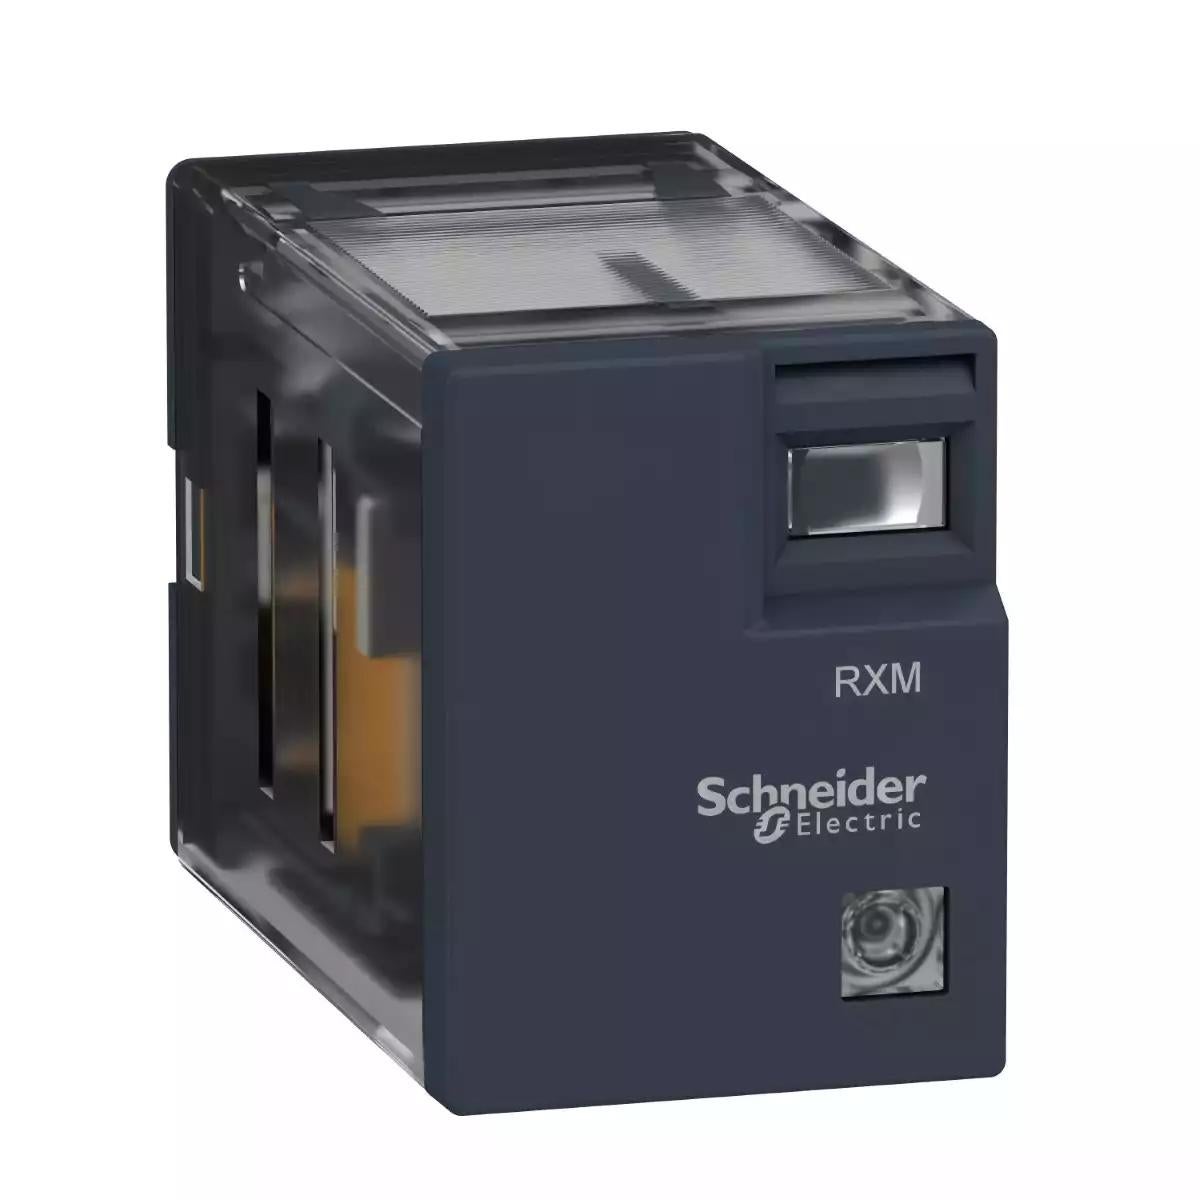 Schneider Electric Zelio RXM - Relay Miniature Plug-in relay2L - 4 C/O - 230 V AC - 3 A - without LED